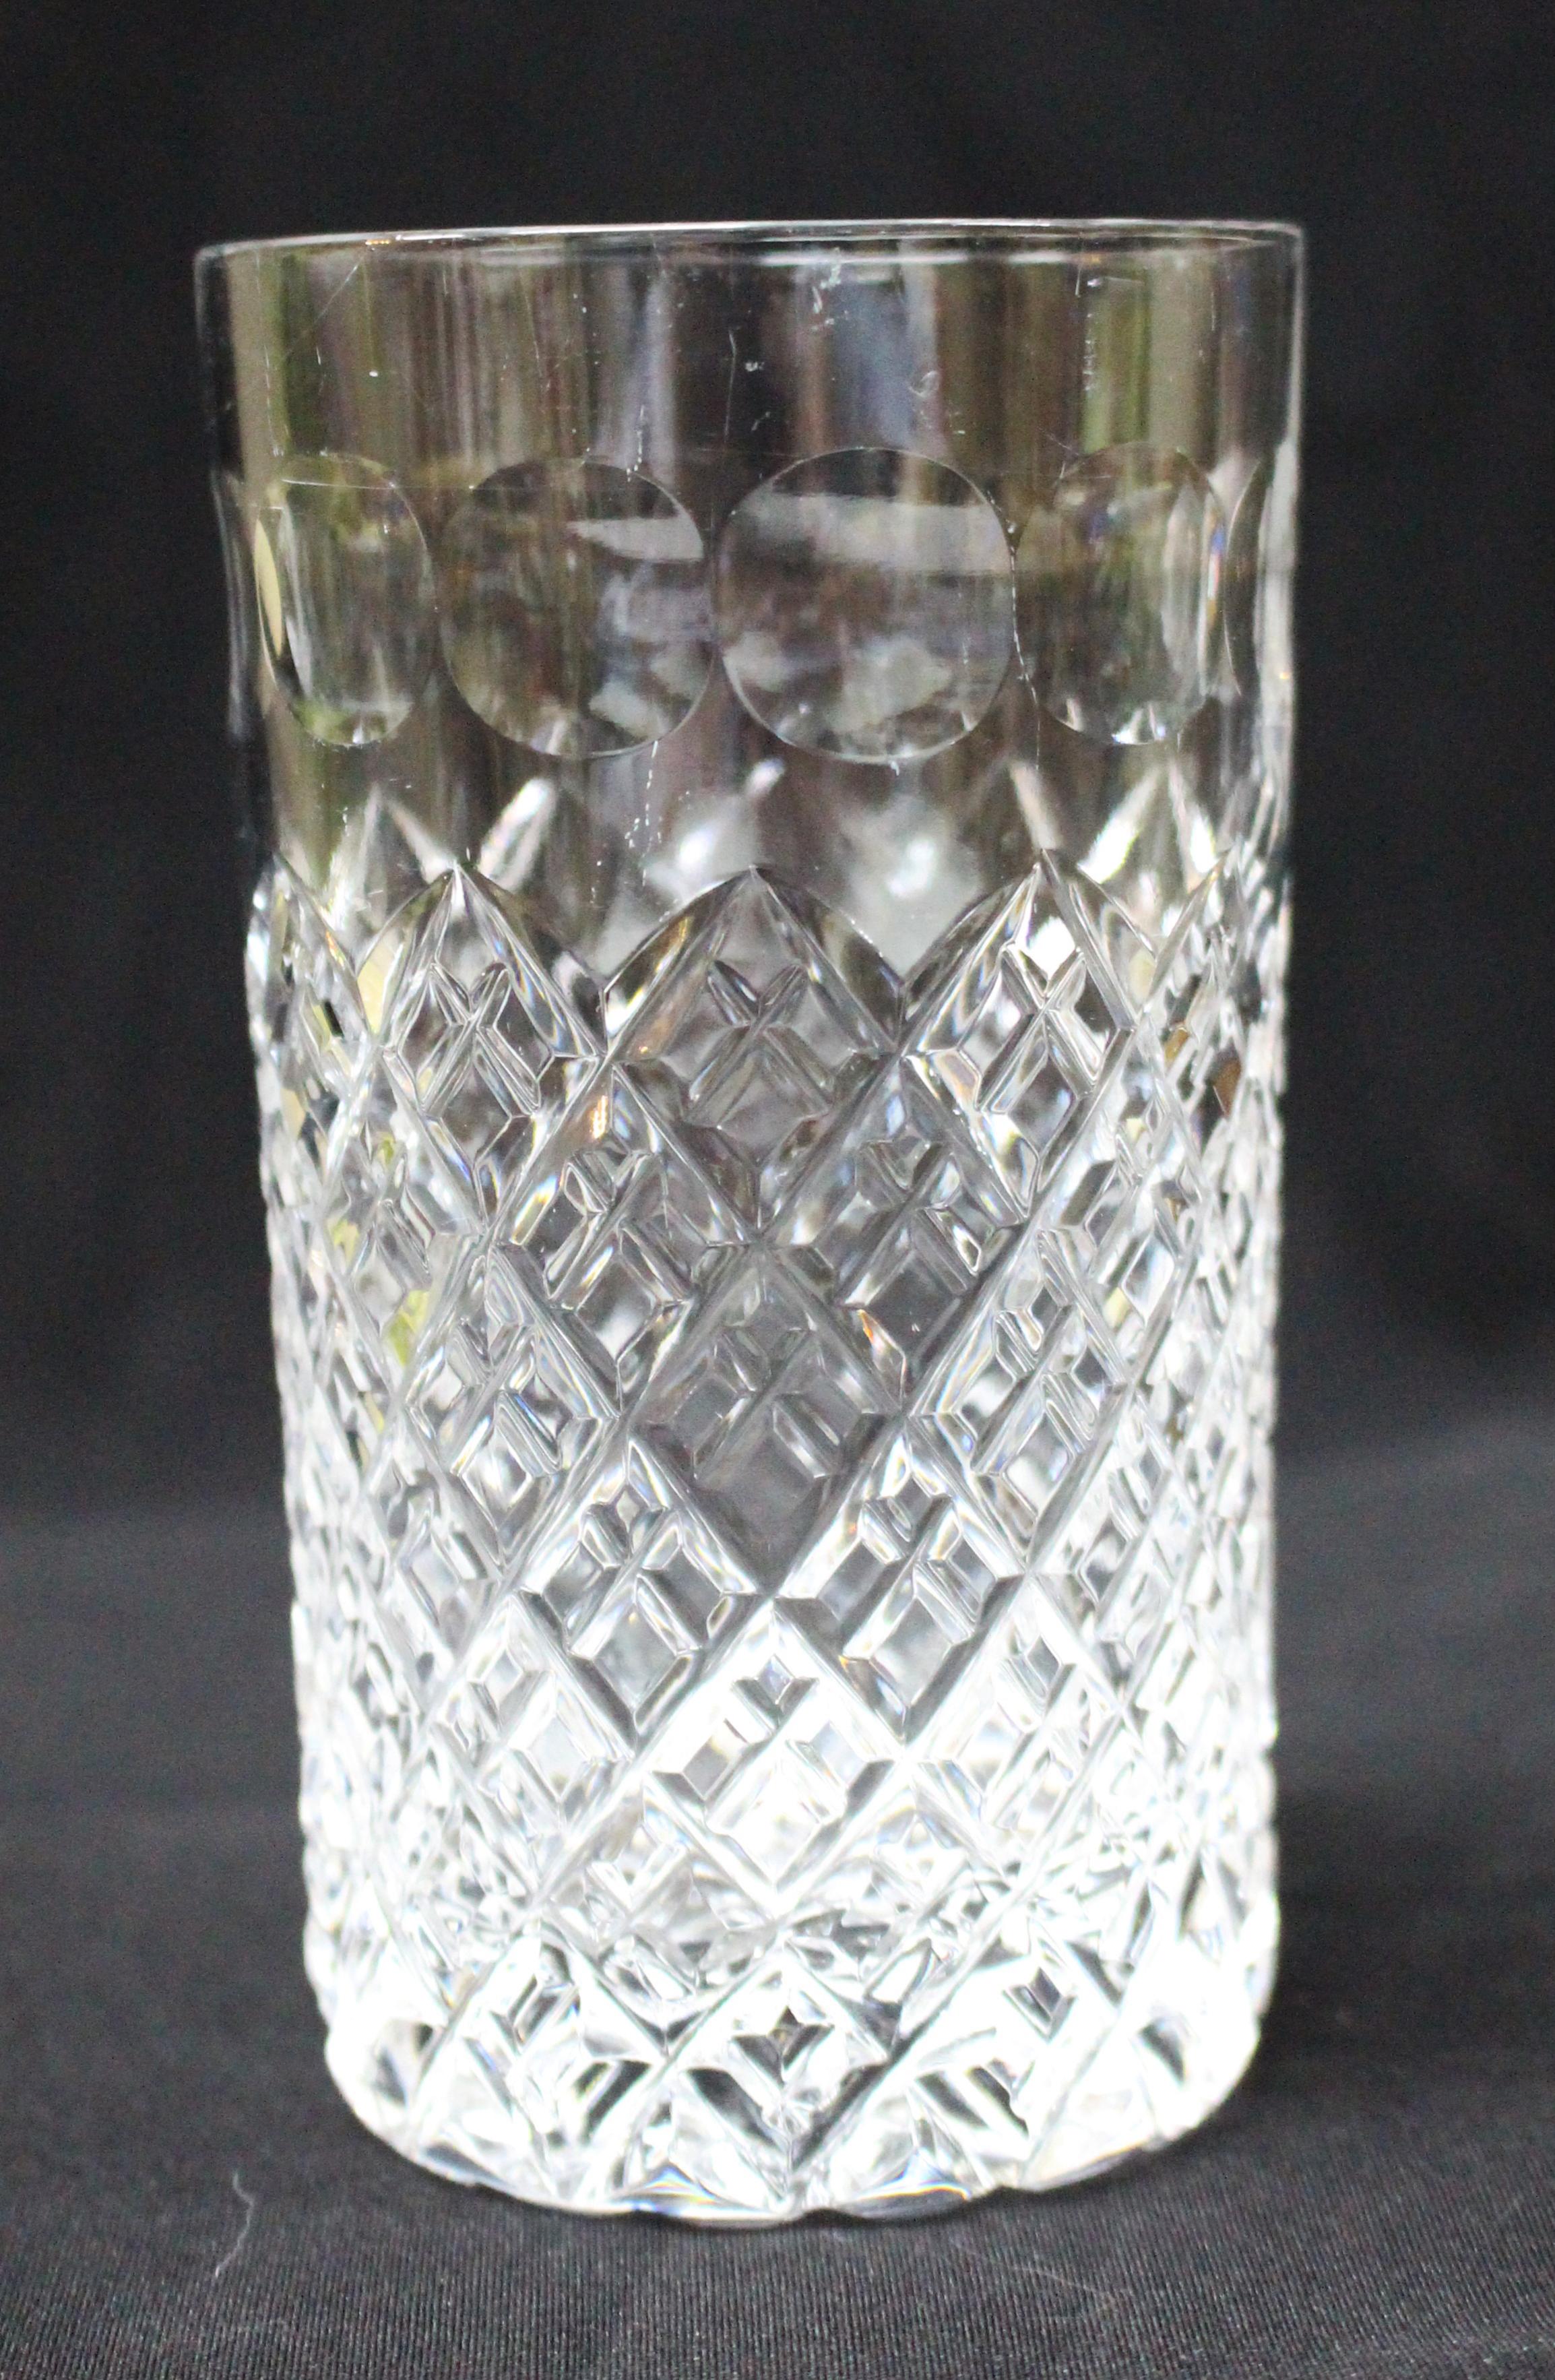 Period circa 1960, English.
Origin Stourbridge, Stuart crystal.
Type Highball glass.
Set of six.
Measures: Top diameter 7 cm / 2 3/4 in
Height 12.5 cm / 5 in.




Very nice quality set of Stuart crystal highball glasses

Hand cut with a